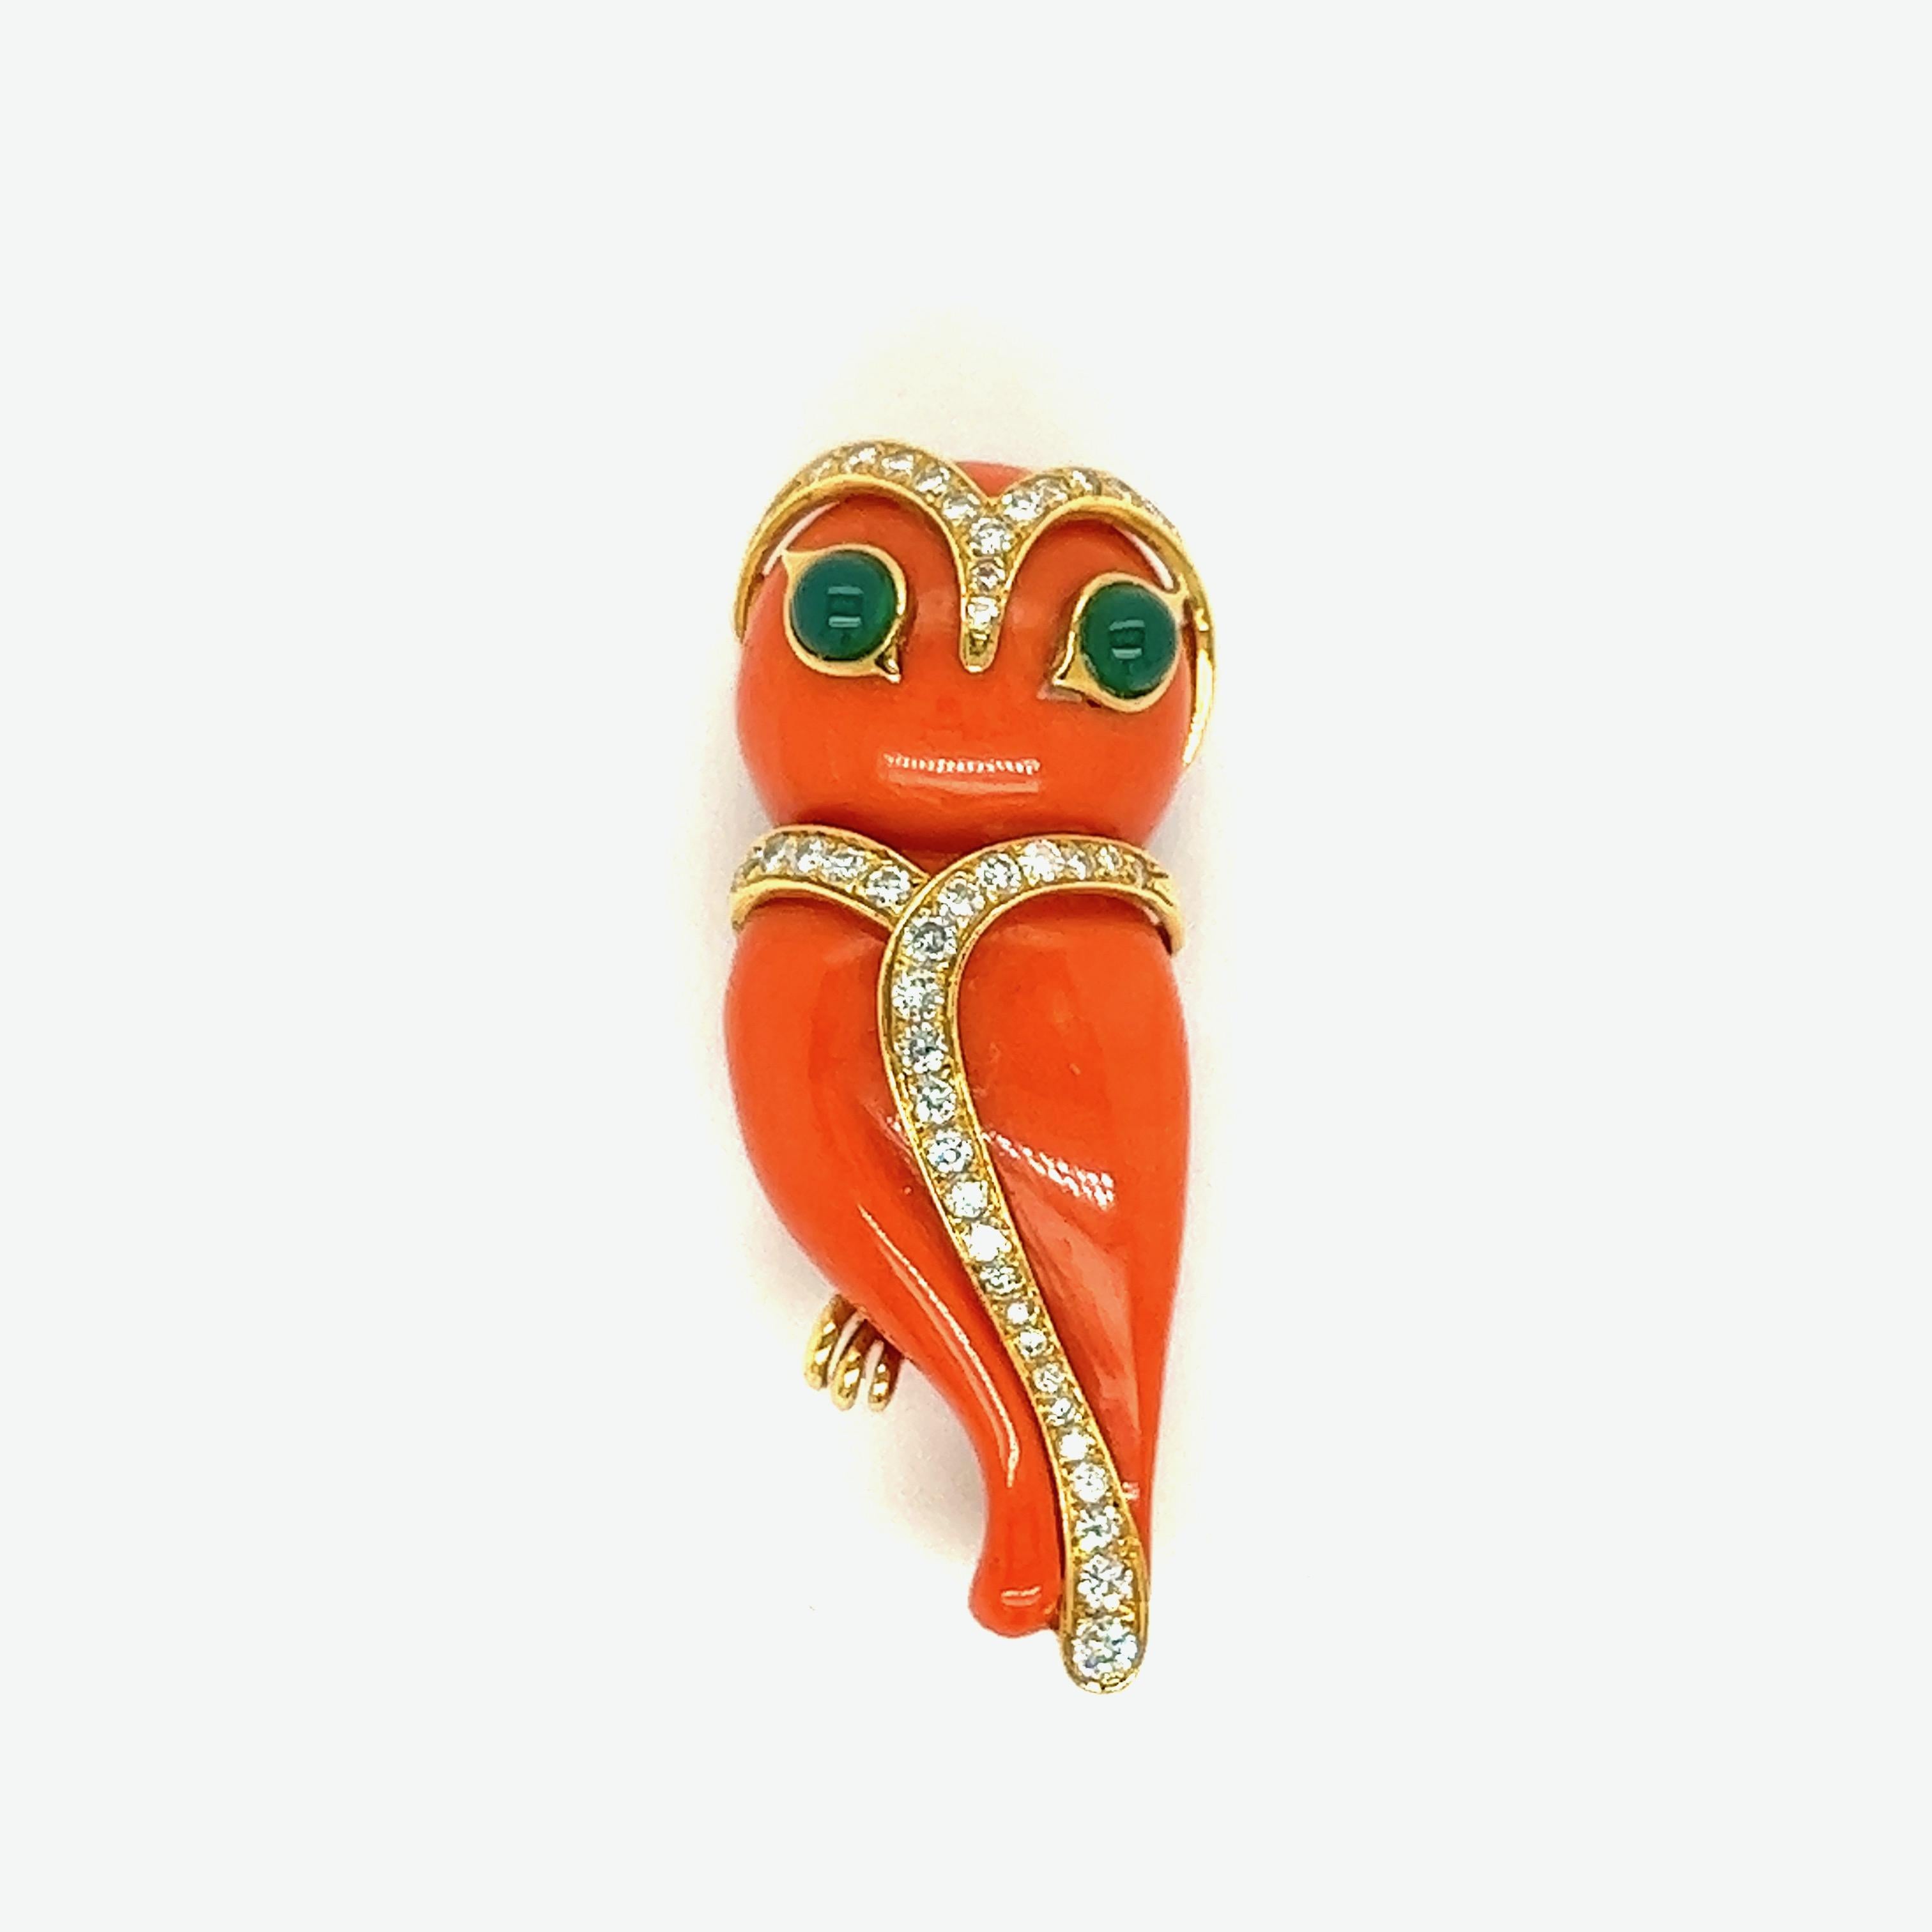 Mayor's Coral Diamond Green Carnelian Owl Brooch, French

An adorable owl made of coral with green carnelian cabochon eyes and cascading round-cut diamonds of approximately 0.70 carat on the head and midline, set on 18 karat yellow gold; marked